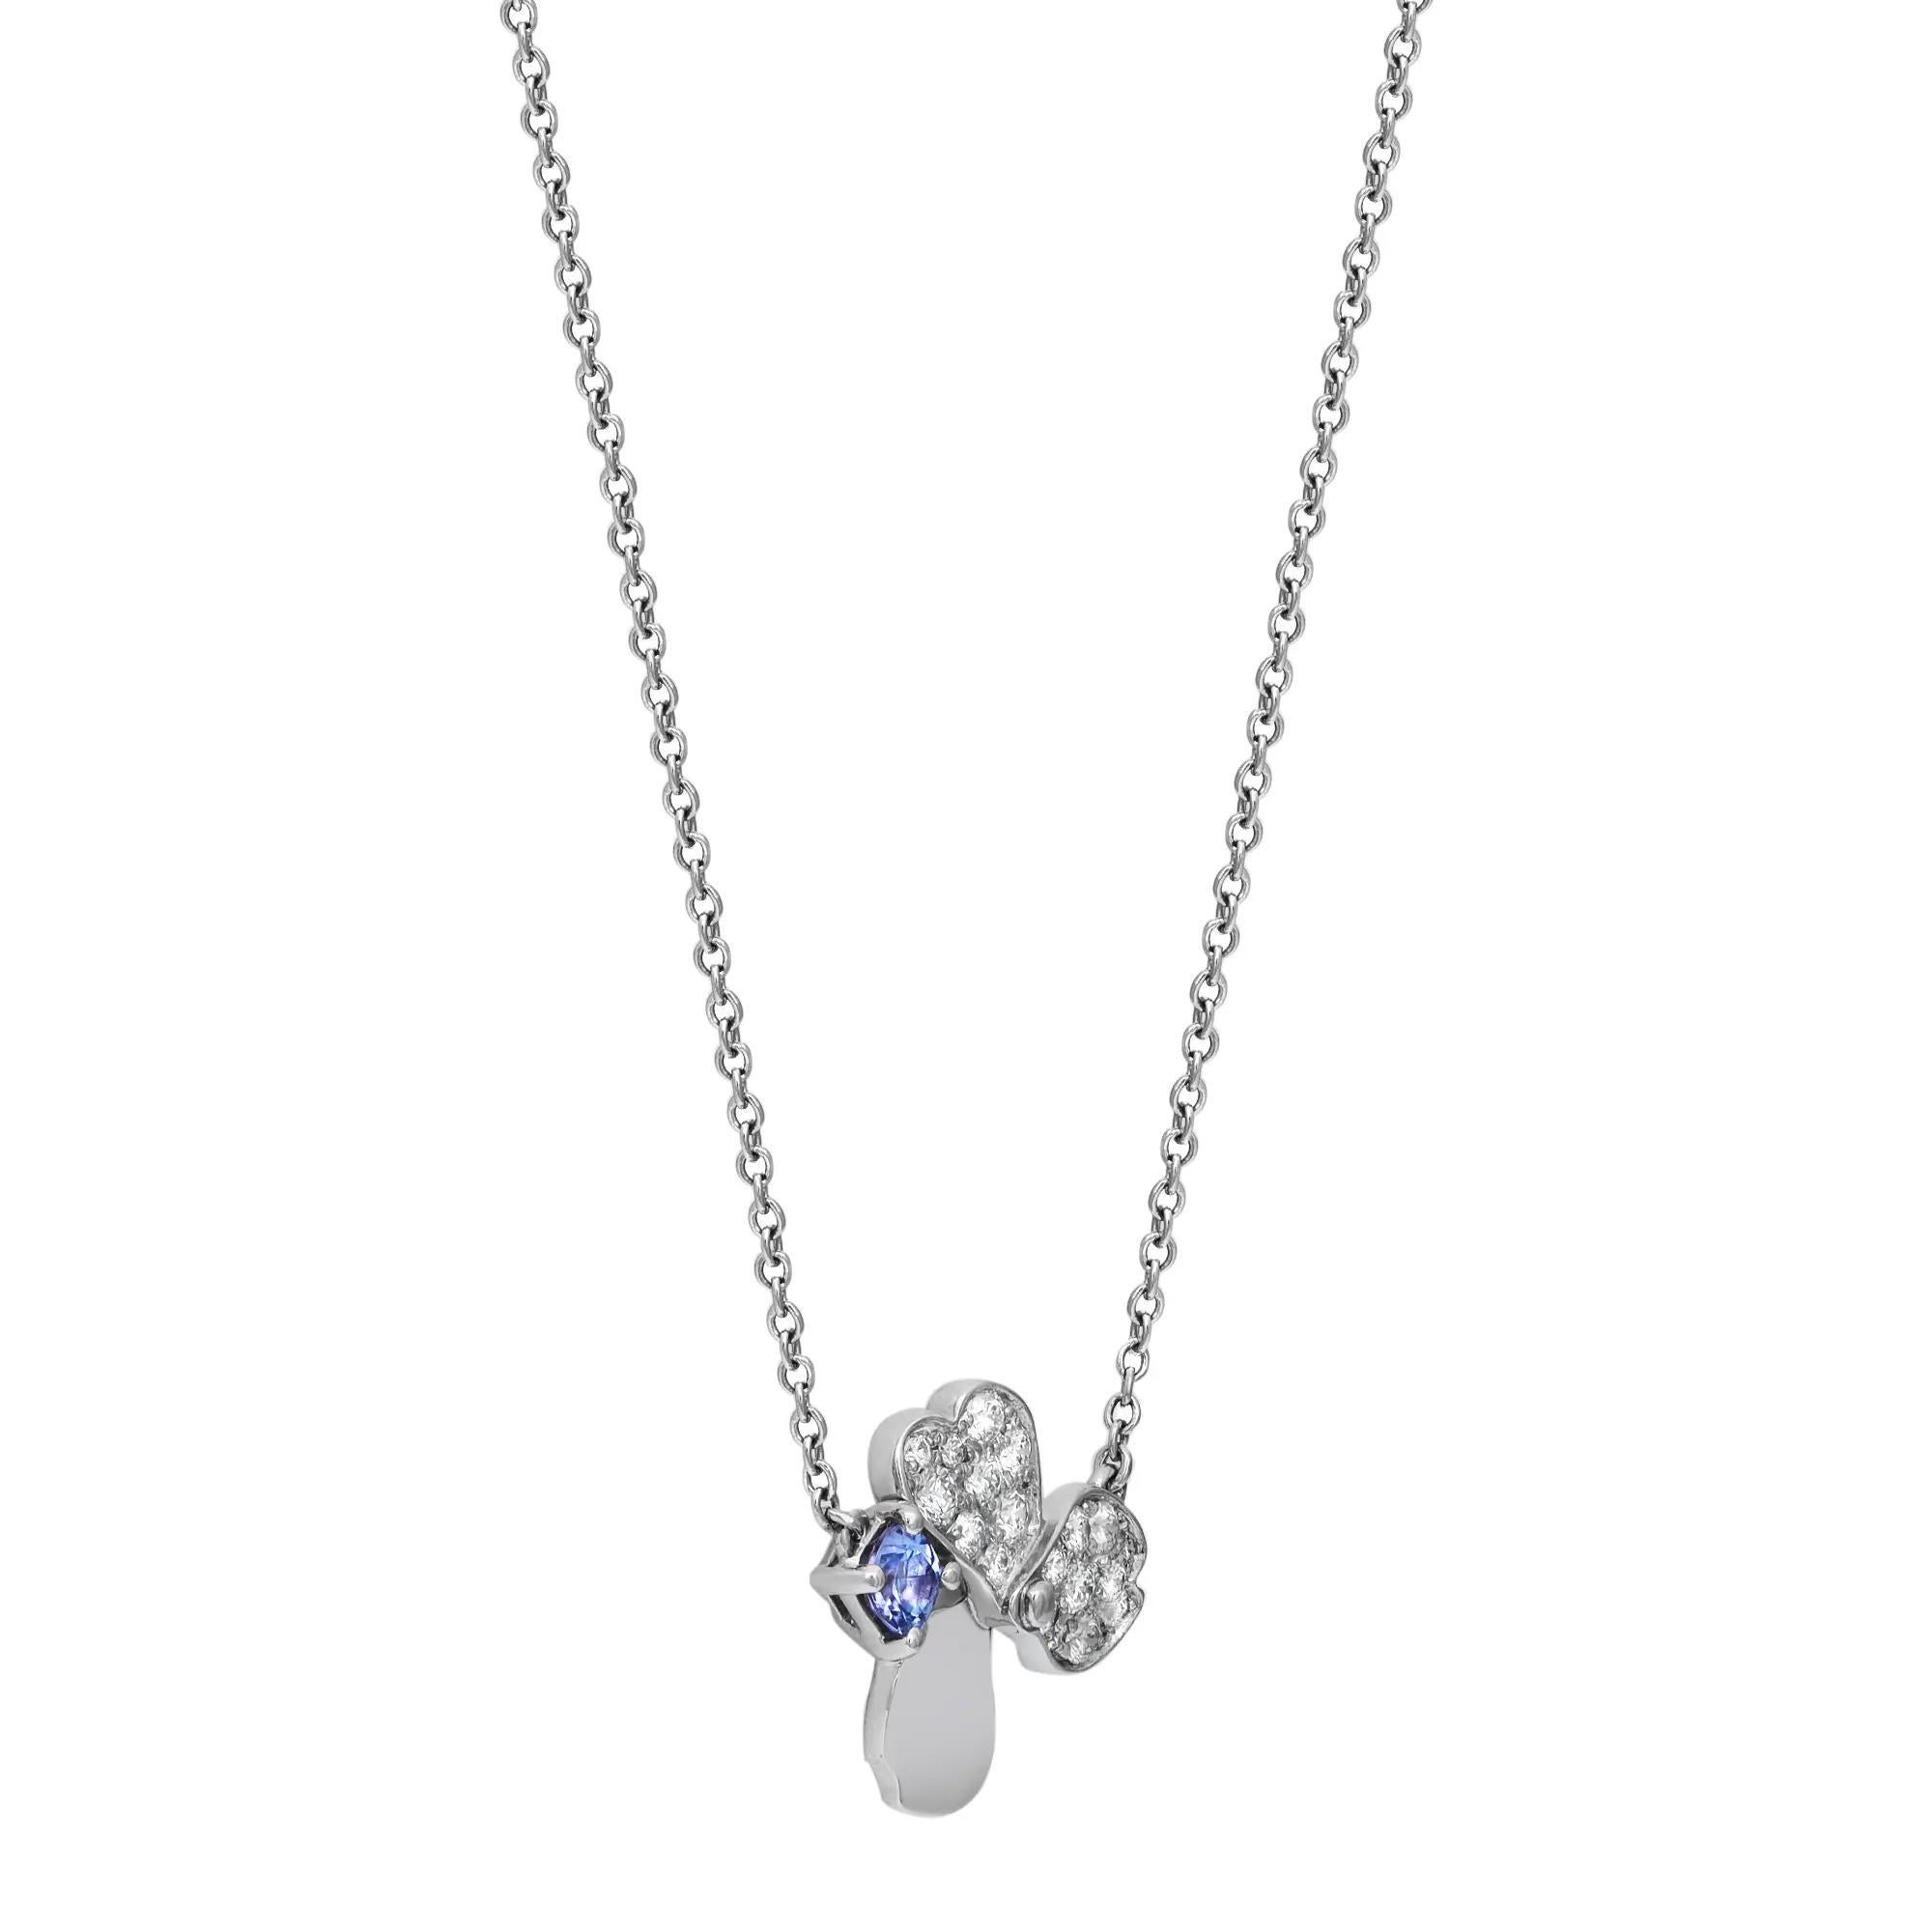 This fabulous Tiffany & Co. Paper Flowers Diamond and Tanzanite Pendant Necklace is a perfect accent to your everyday and evening look and gives a touch of chic to any ensemble you pair it with. Crafted in lustrous platinum. It features a flower